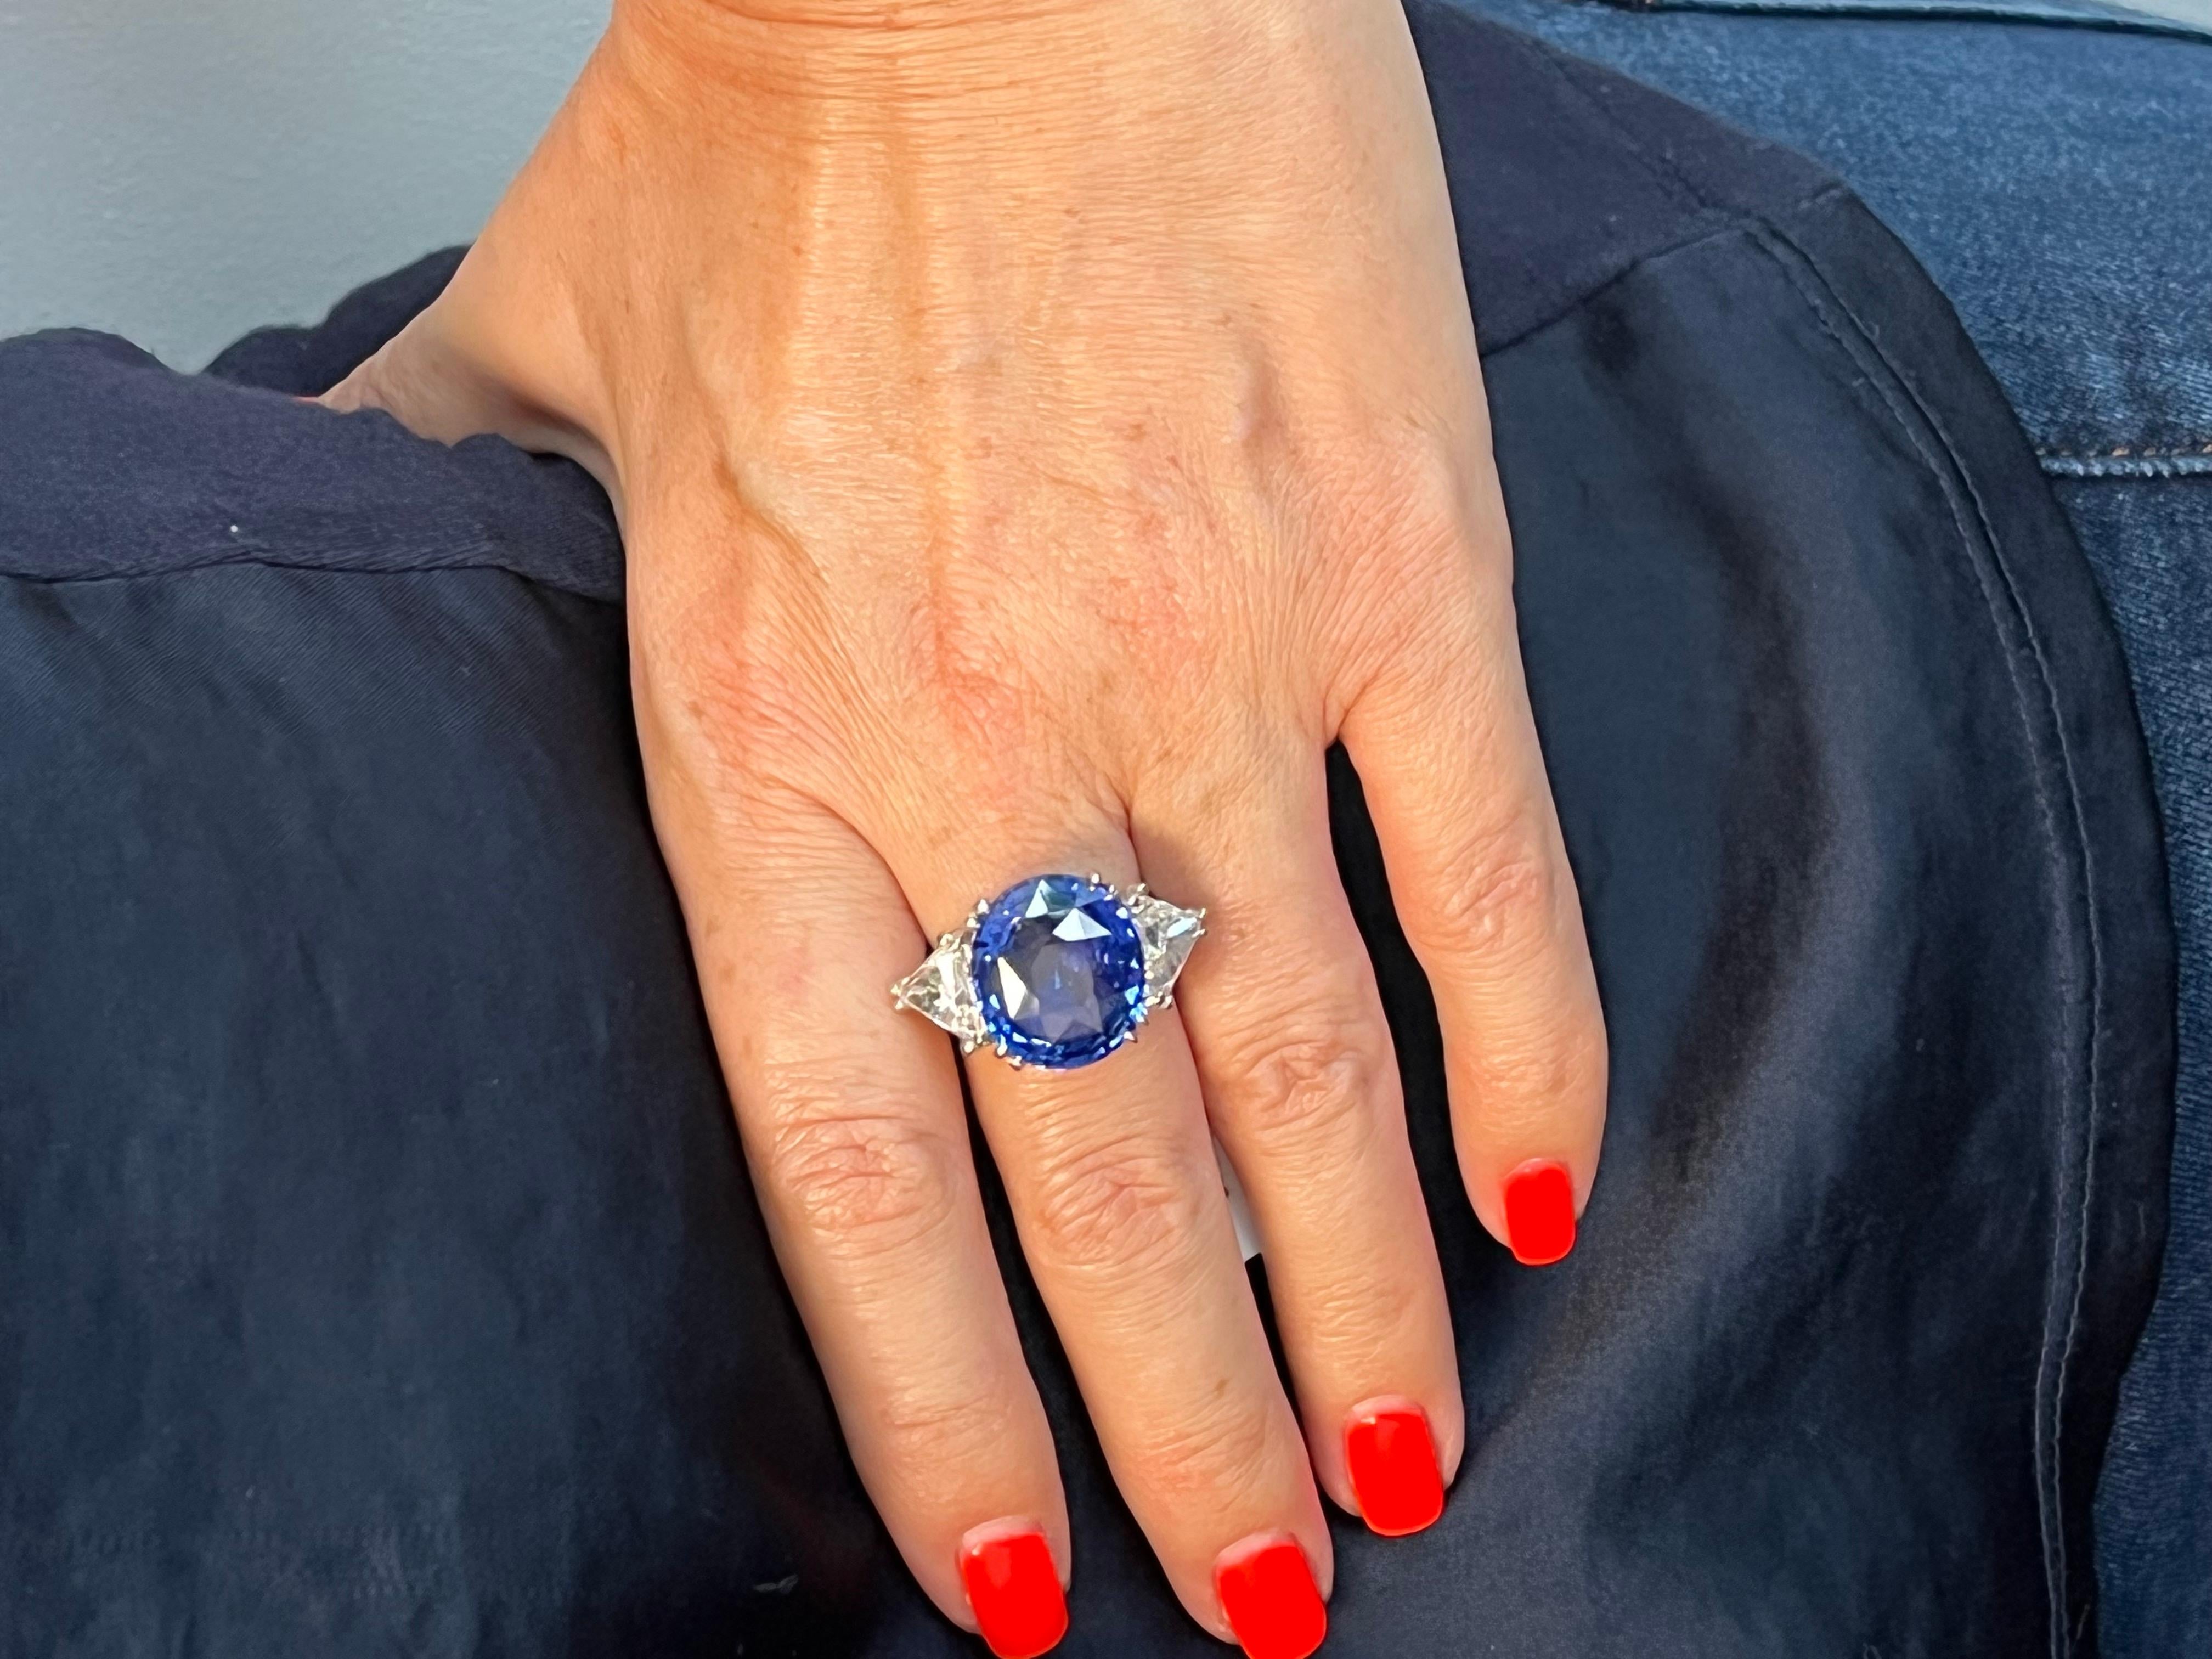 Item Description:
This exquisite 14.64-carat G.I.A. certified natural blue sapphire takes center stage in this mesmerizing 18 karat white gold ring. This oval-shaped sapphire exhibits the deep, rich blue hue that sapphires are cherished for.